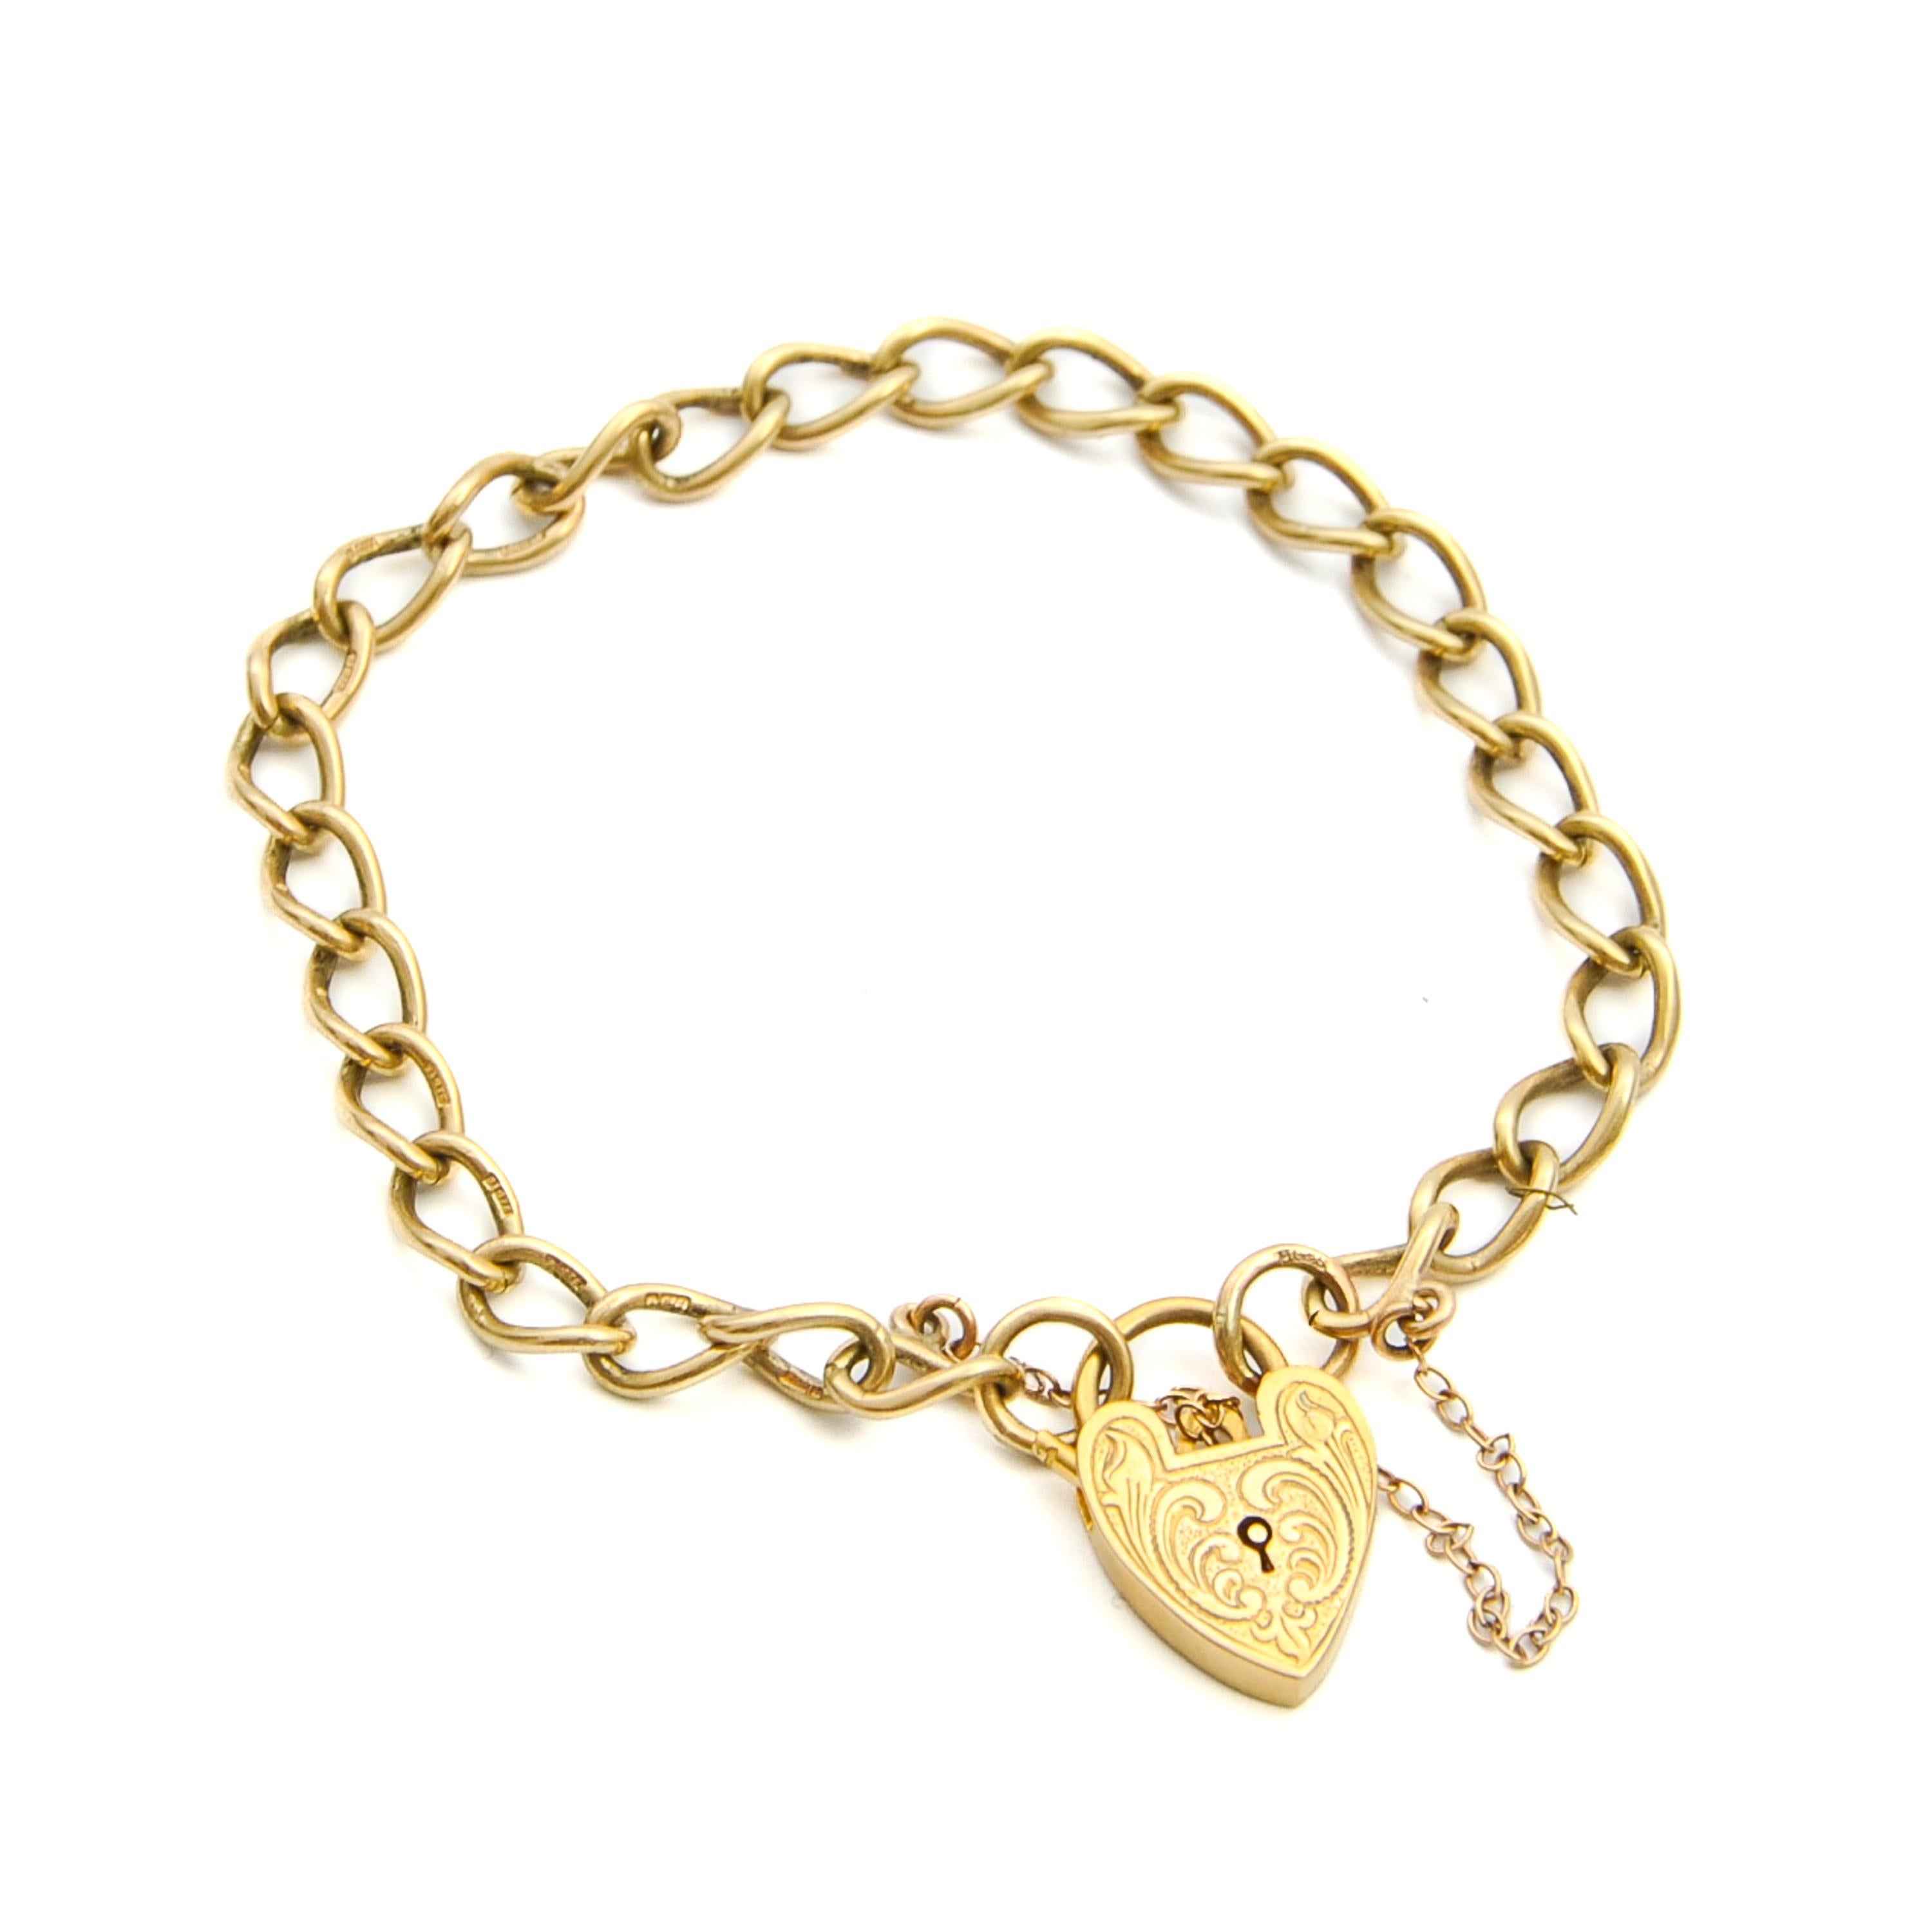 A lovely padlock curb chain charms bracelet set with an engraved heart closure. The curb chain and heart are created in 9 karat gold. The heart-shaped padlock has beautiful engravings on the front and is fitted with a safety chain. The bracelet set